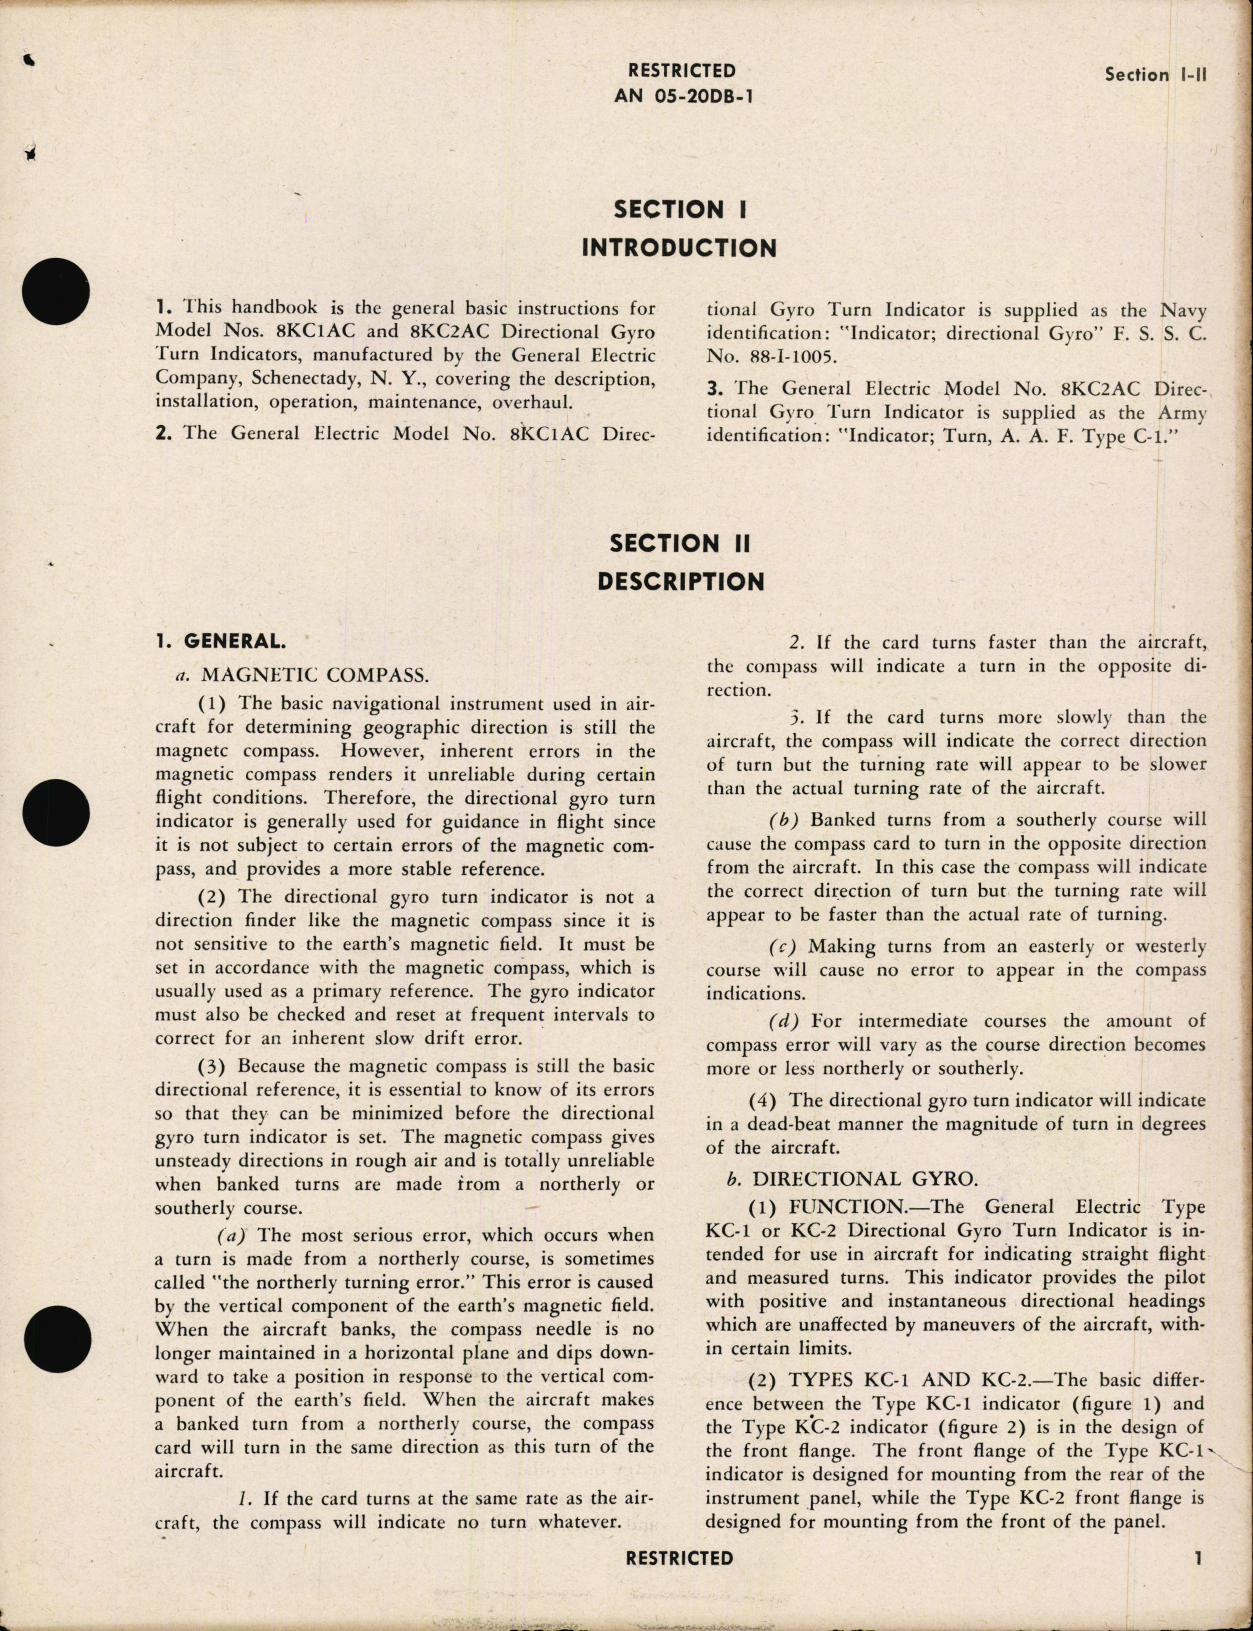 Sample page 7 from AirCorps Library document: Operation, Service & Overhaul Inst with Parts Catalog for Directional Gyro Turn Indicator Type C-1 F.S.S.C. No. 88-I-1005